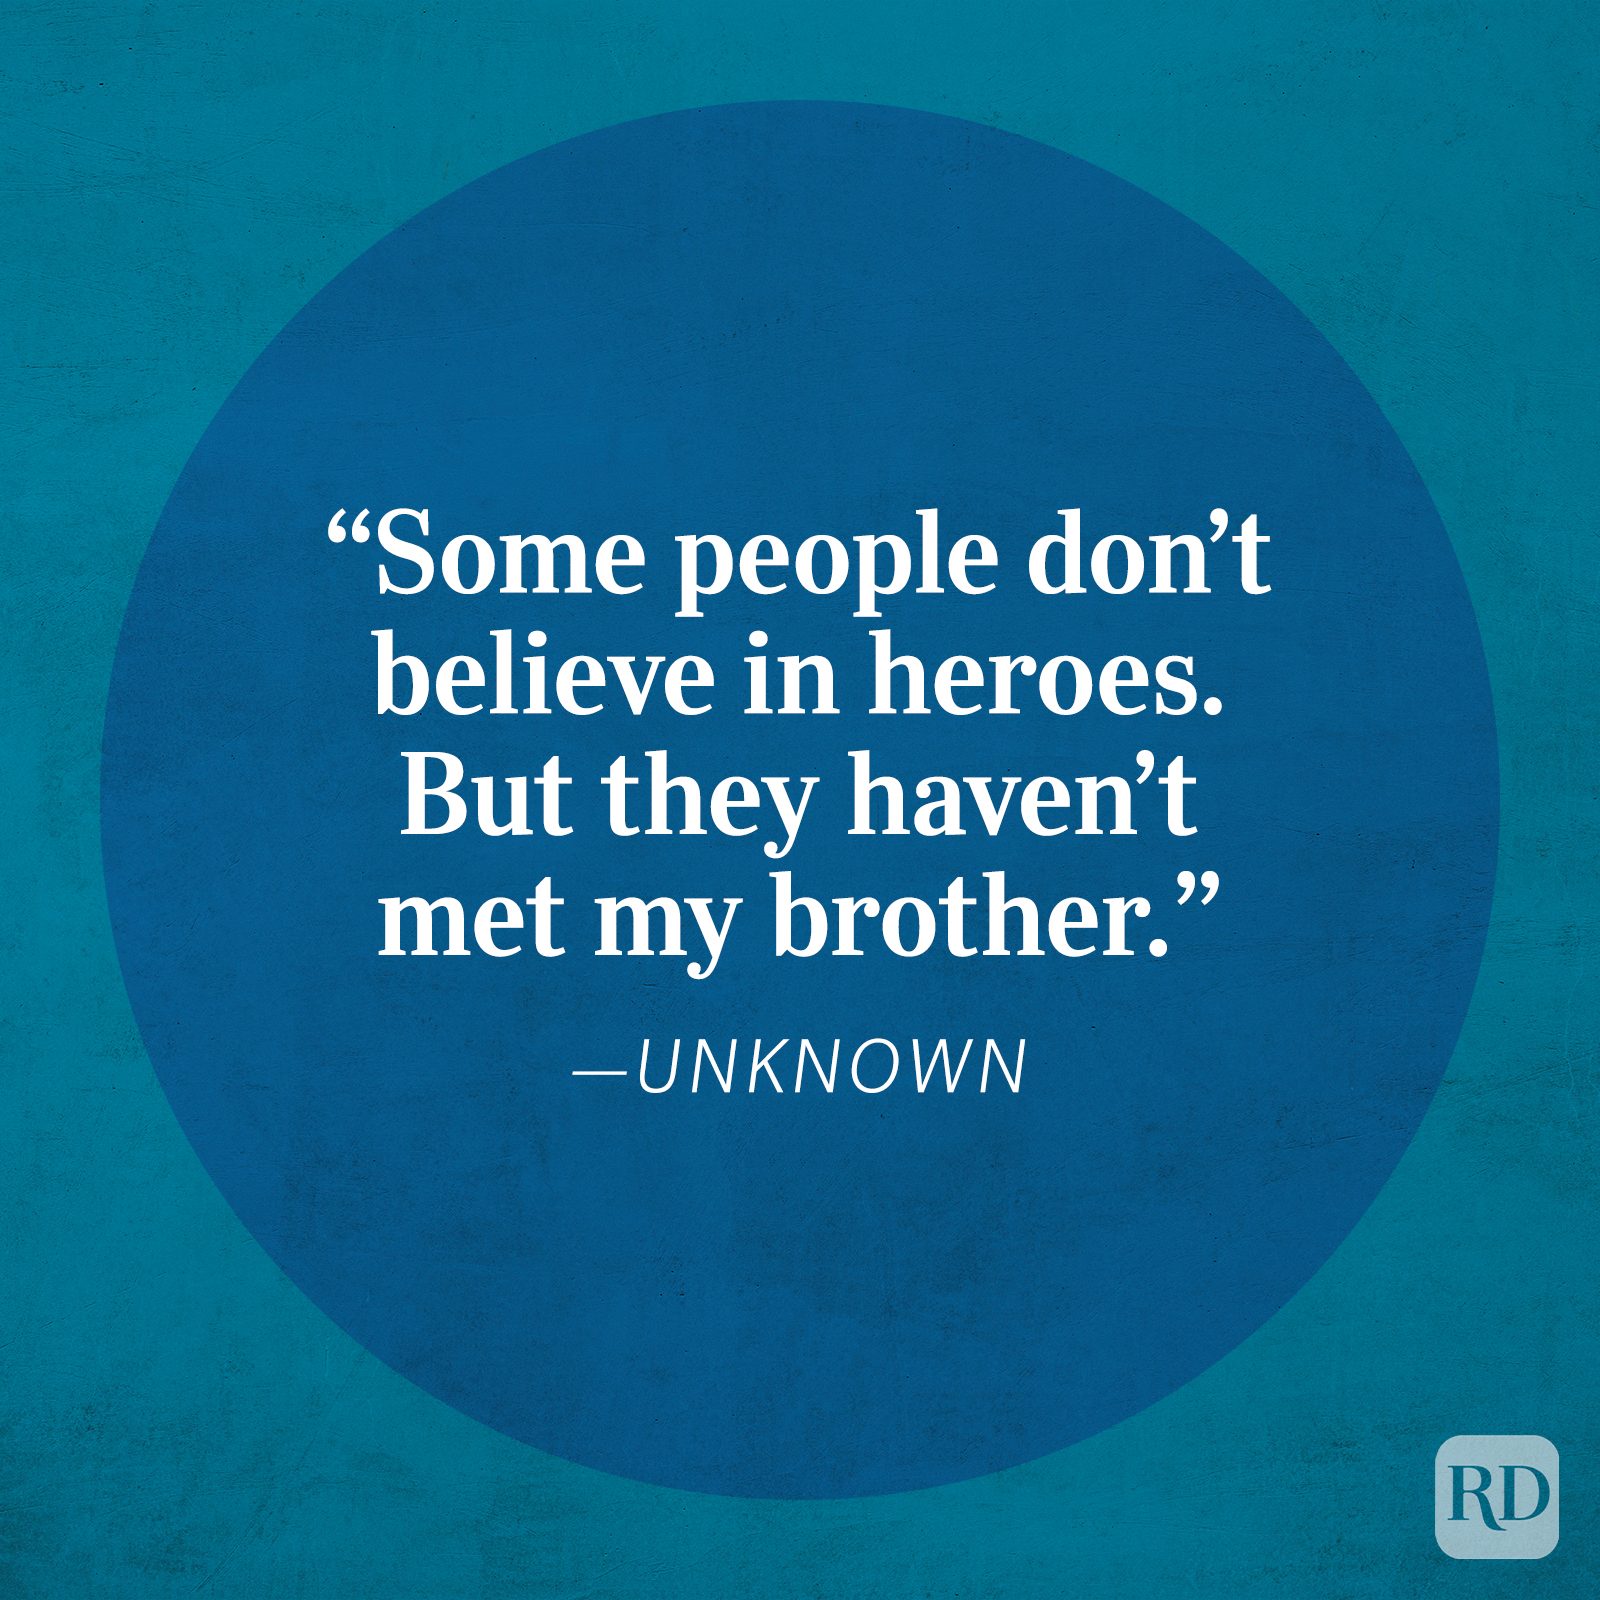 20 Best Brother Quotes - Funny, Heartfelt Quotes About Brothers